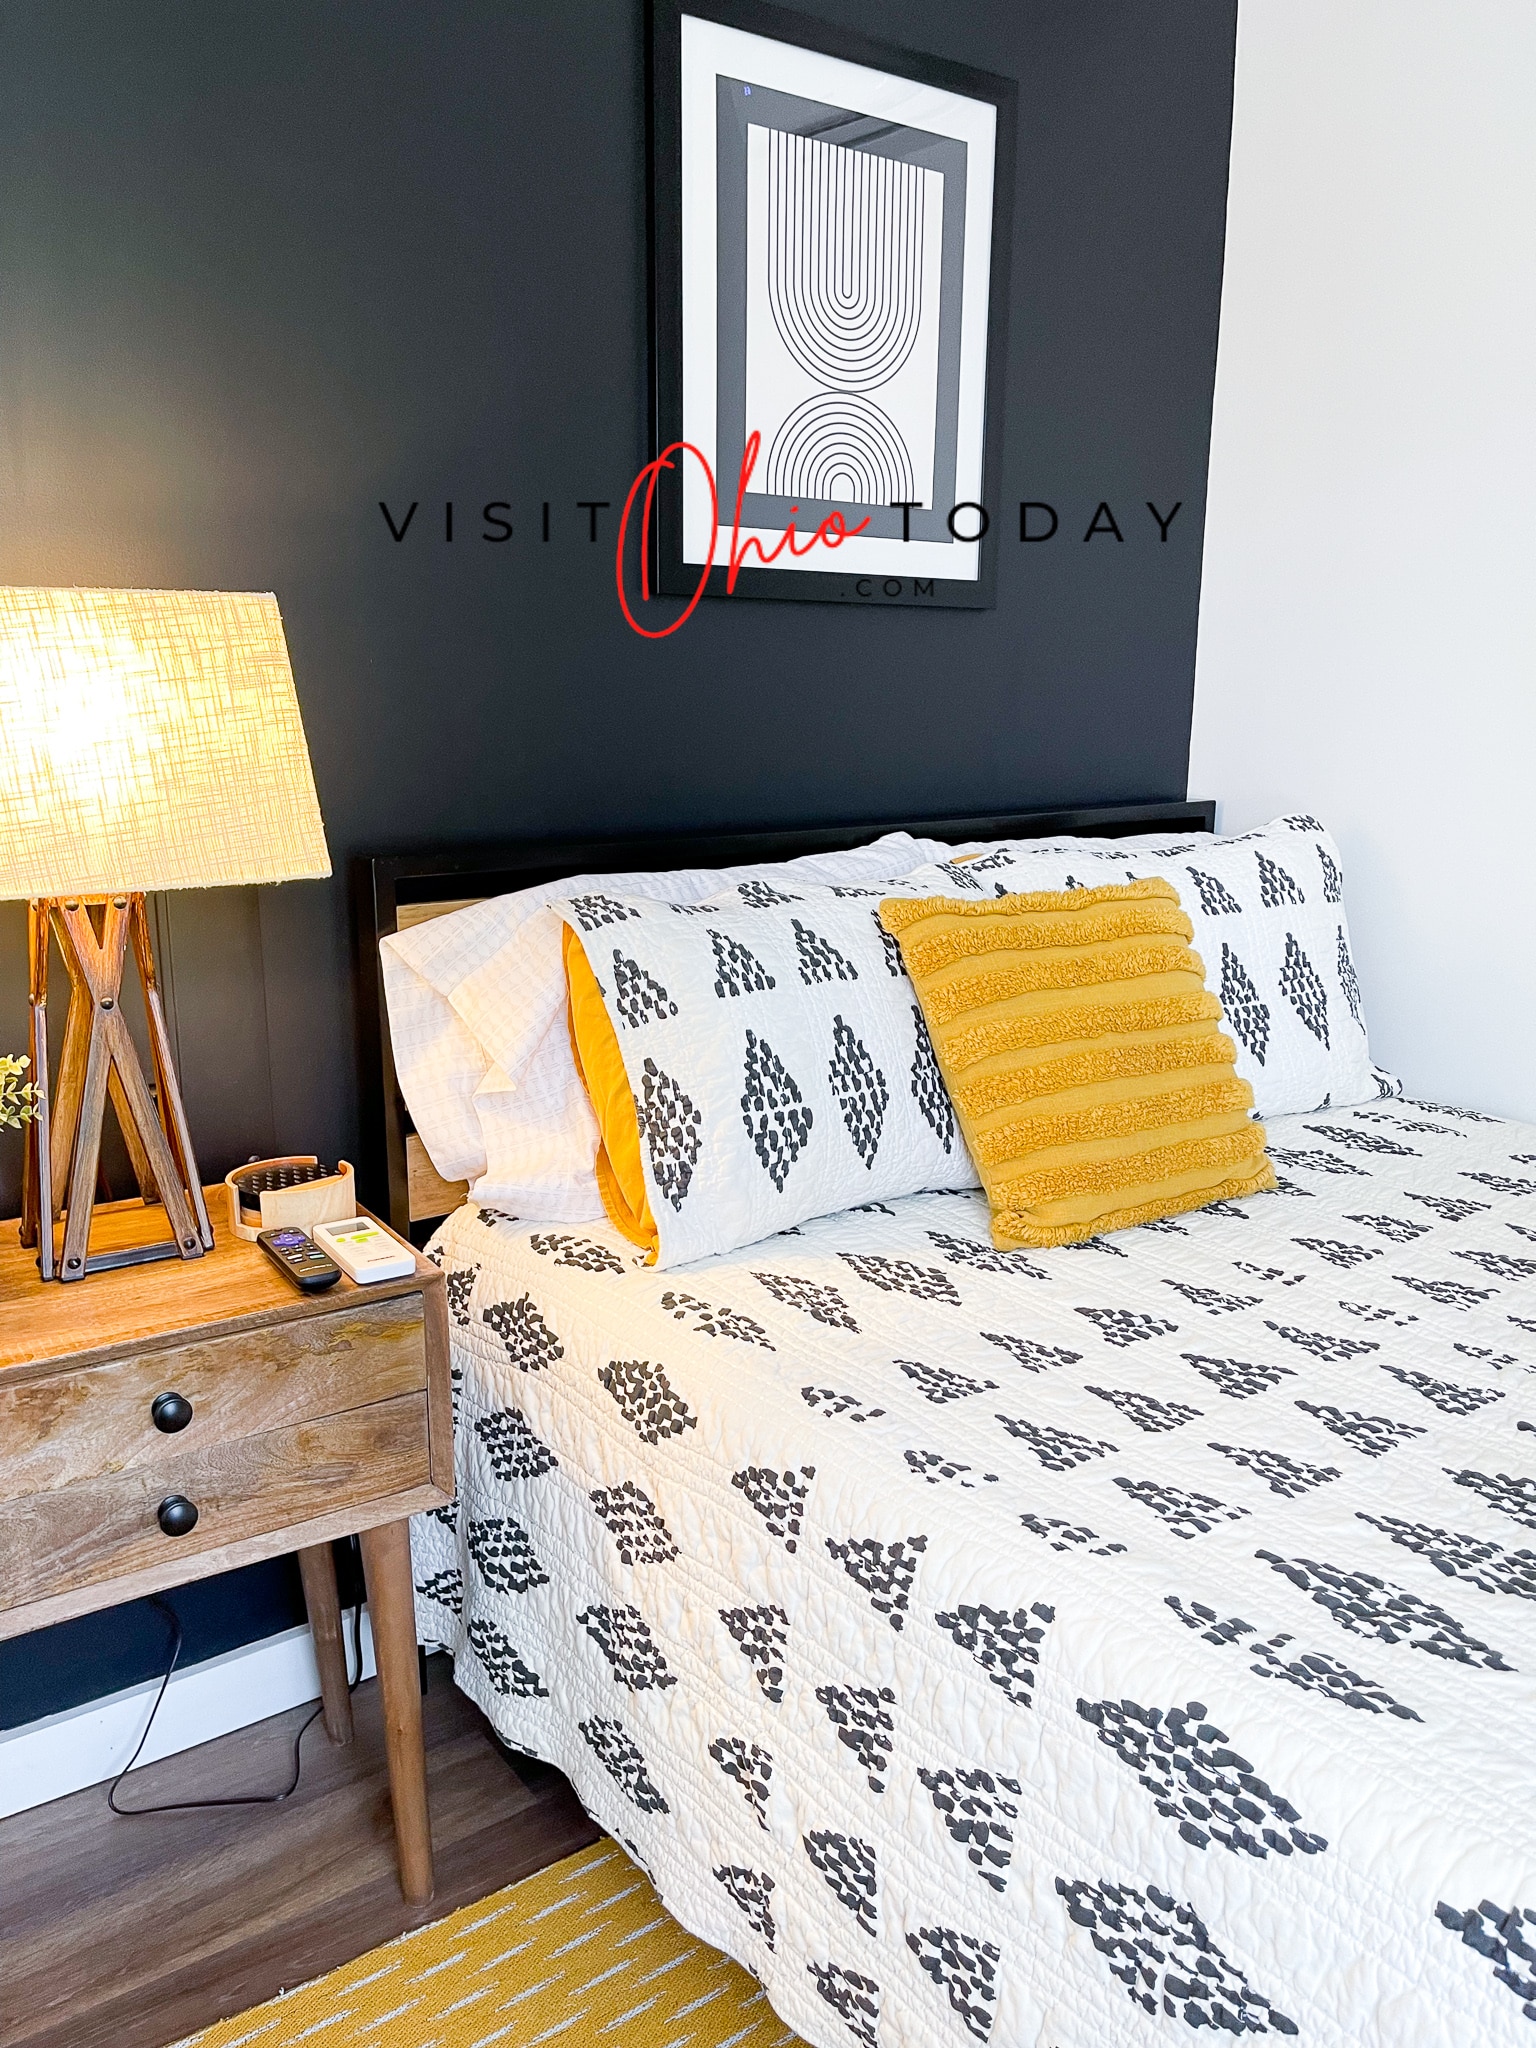 lamp on bedside table, bed with black and white comforter and yellow pillow, black wall with art hung